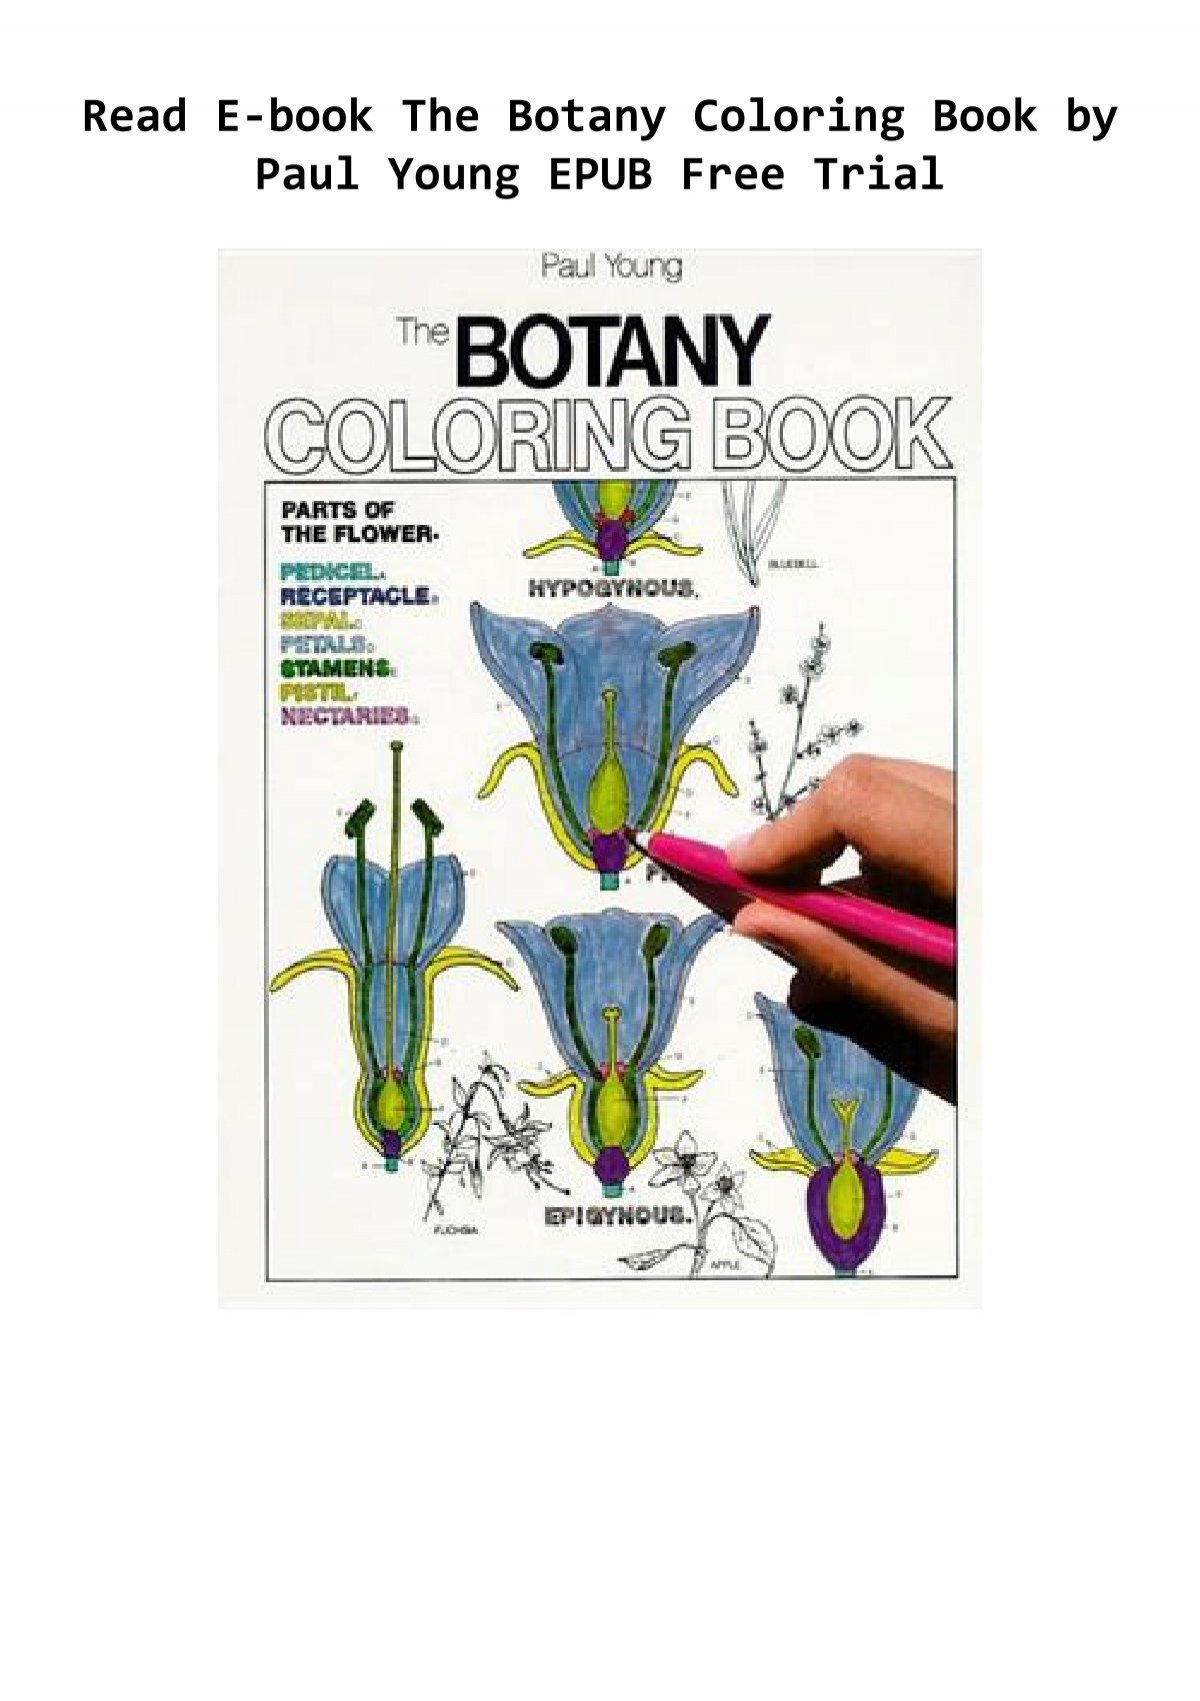 Download Read E Book The Botany Coloring Book By Paul Young Epub Free Trial